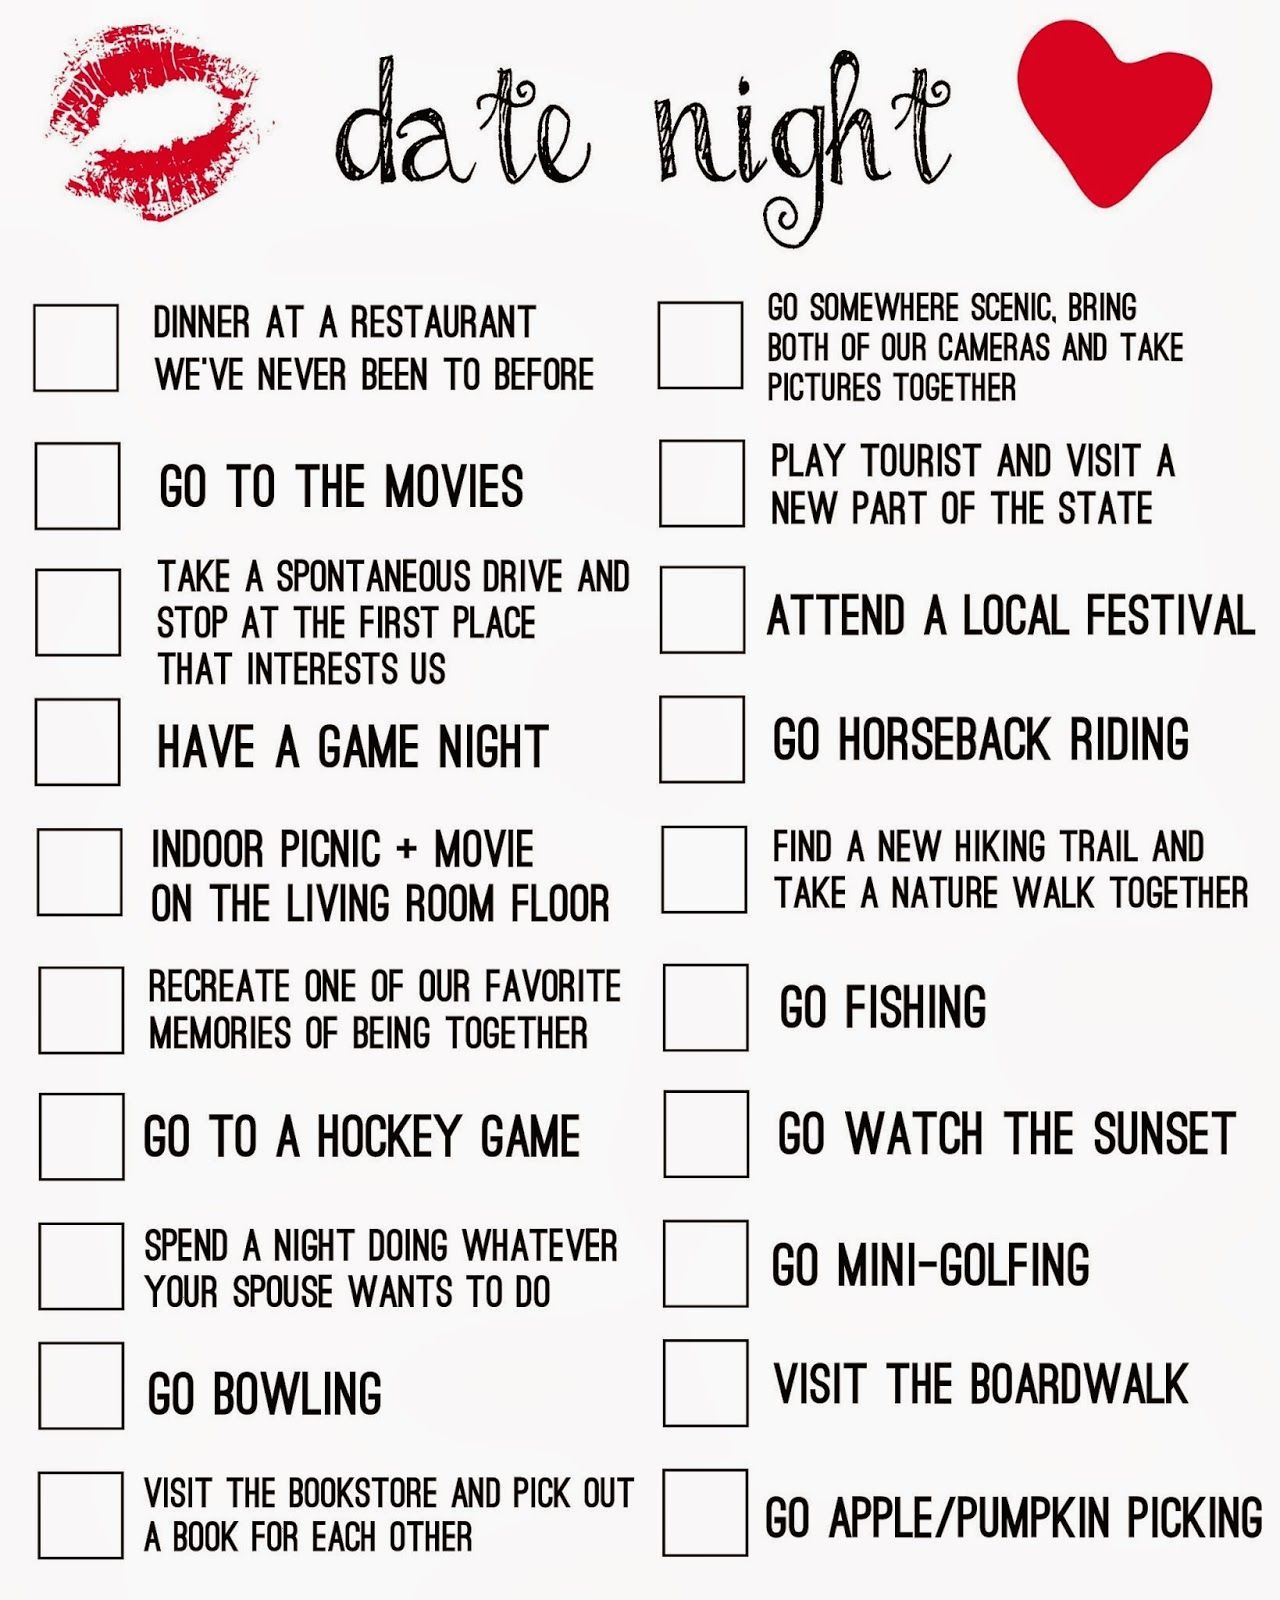 In a date night rut? Download my Date Night printable for some new ideas!